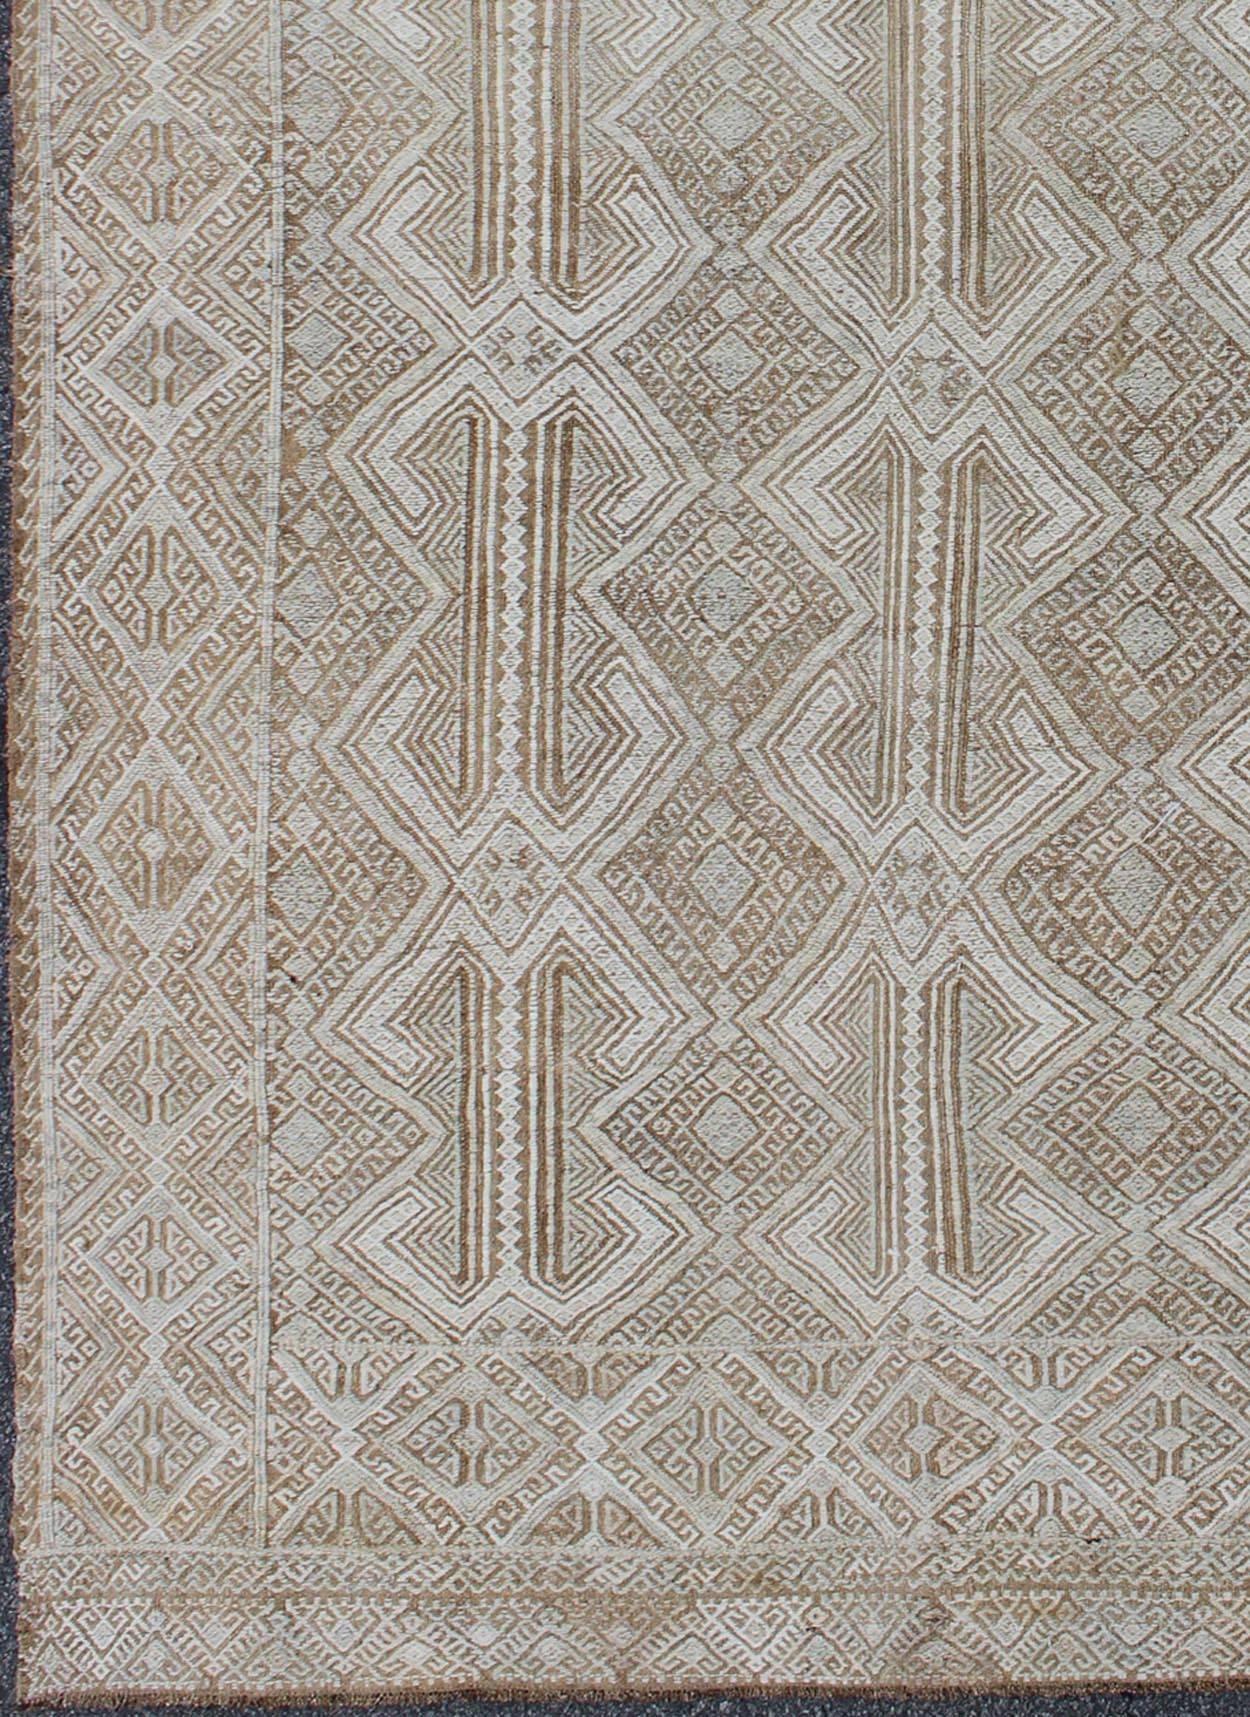 Midcentury Turkish Embroidered Flat Weave with all-over geometric design in ivory, taupe, light brown and neutral tones. Keivan Woven Arts/rug en-141075, country of origin / type: Turkey / Kilim, circa 1950.

Measures: 6' x 10'.

This delightful